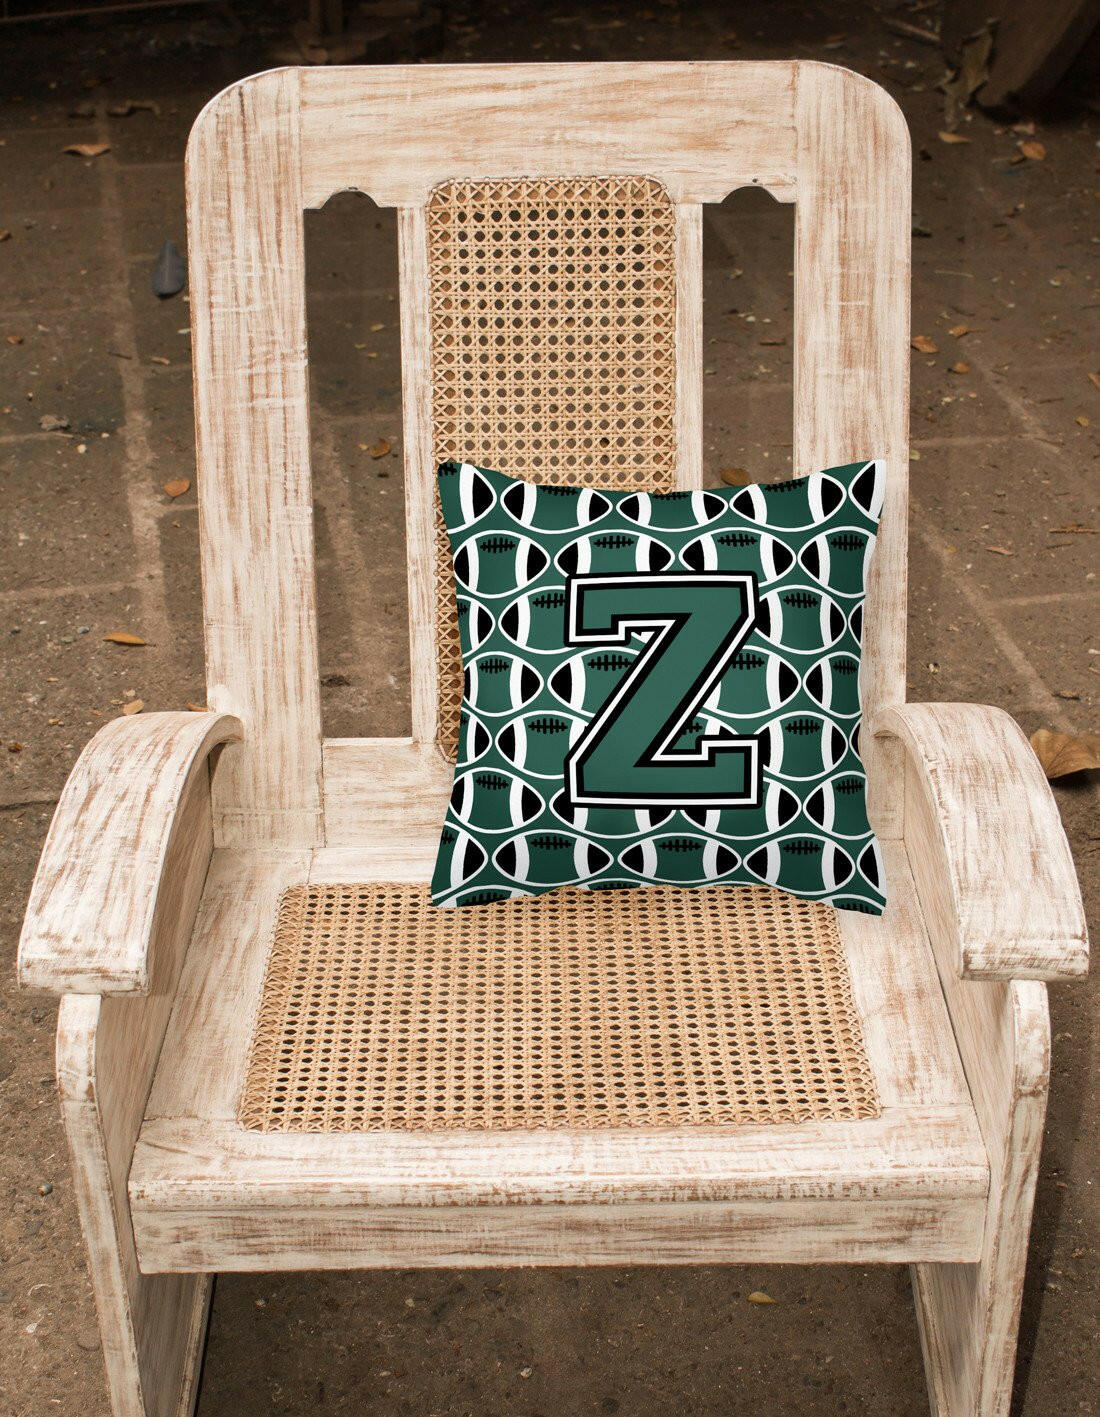 Letter Z Football Green and White Fabric Decorative Pillow CJ1071-ZPW1414 by Caroline's Treasures